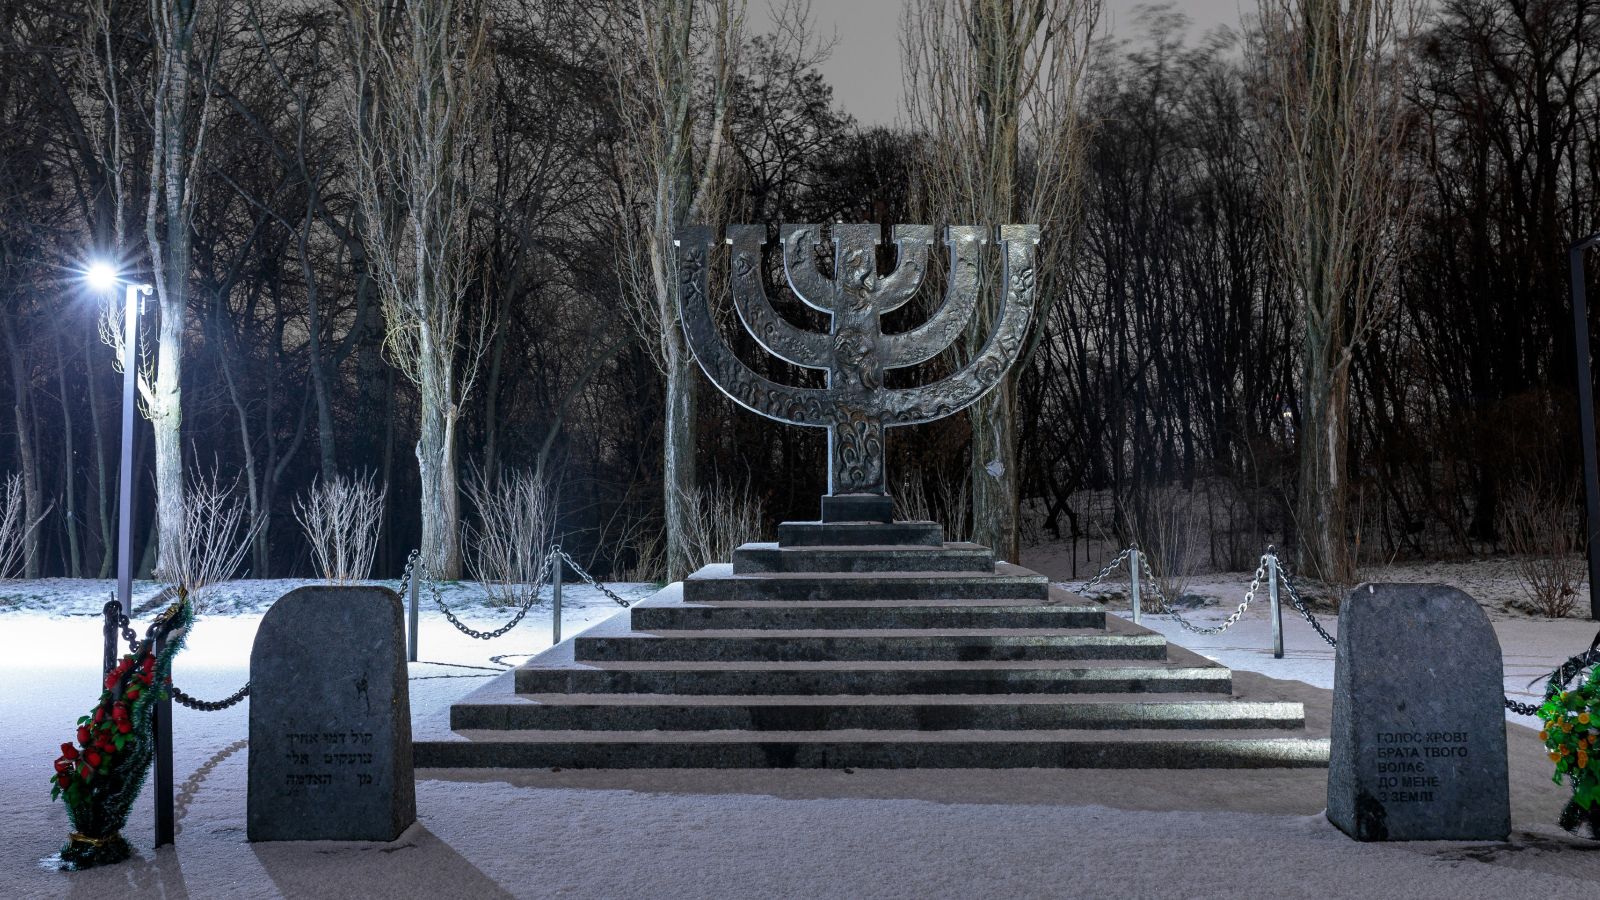 A nighttime view of a memorial on the site of the 1941 Babi Yar massacre